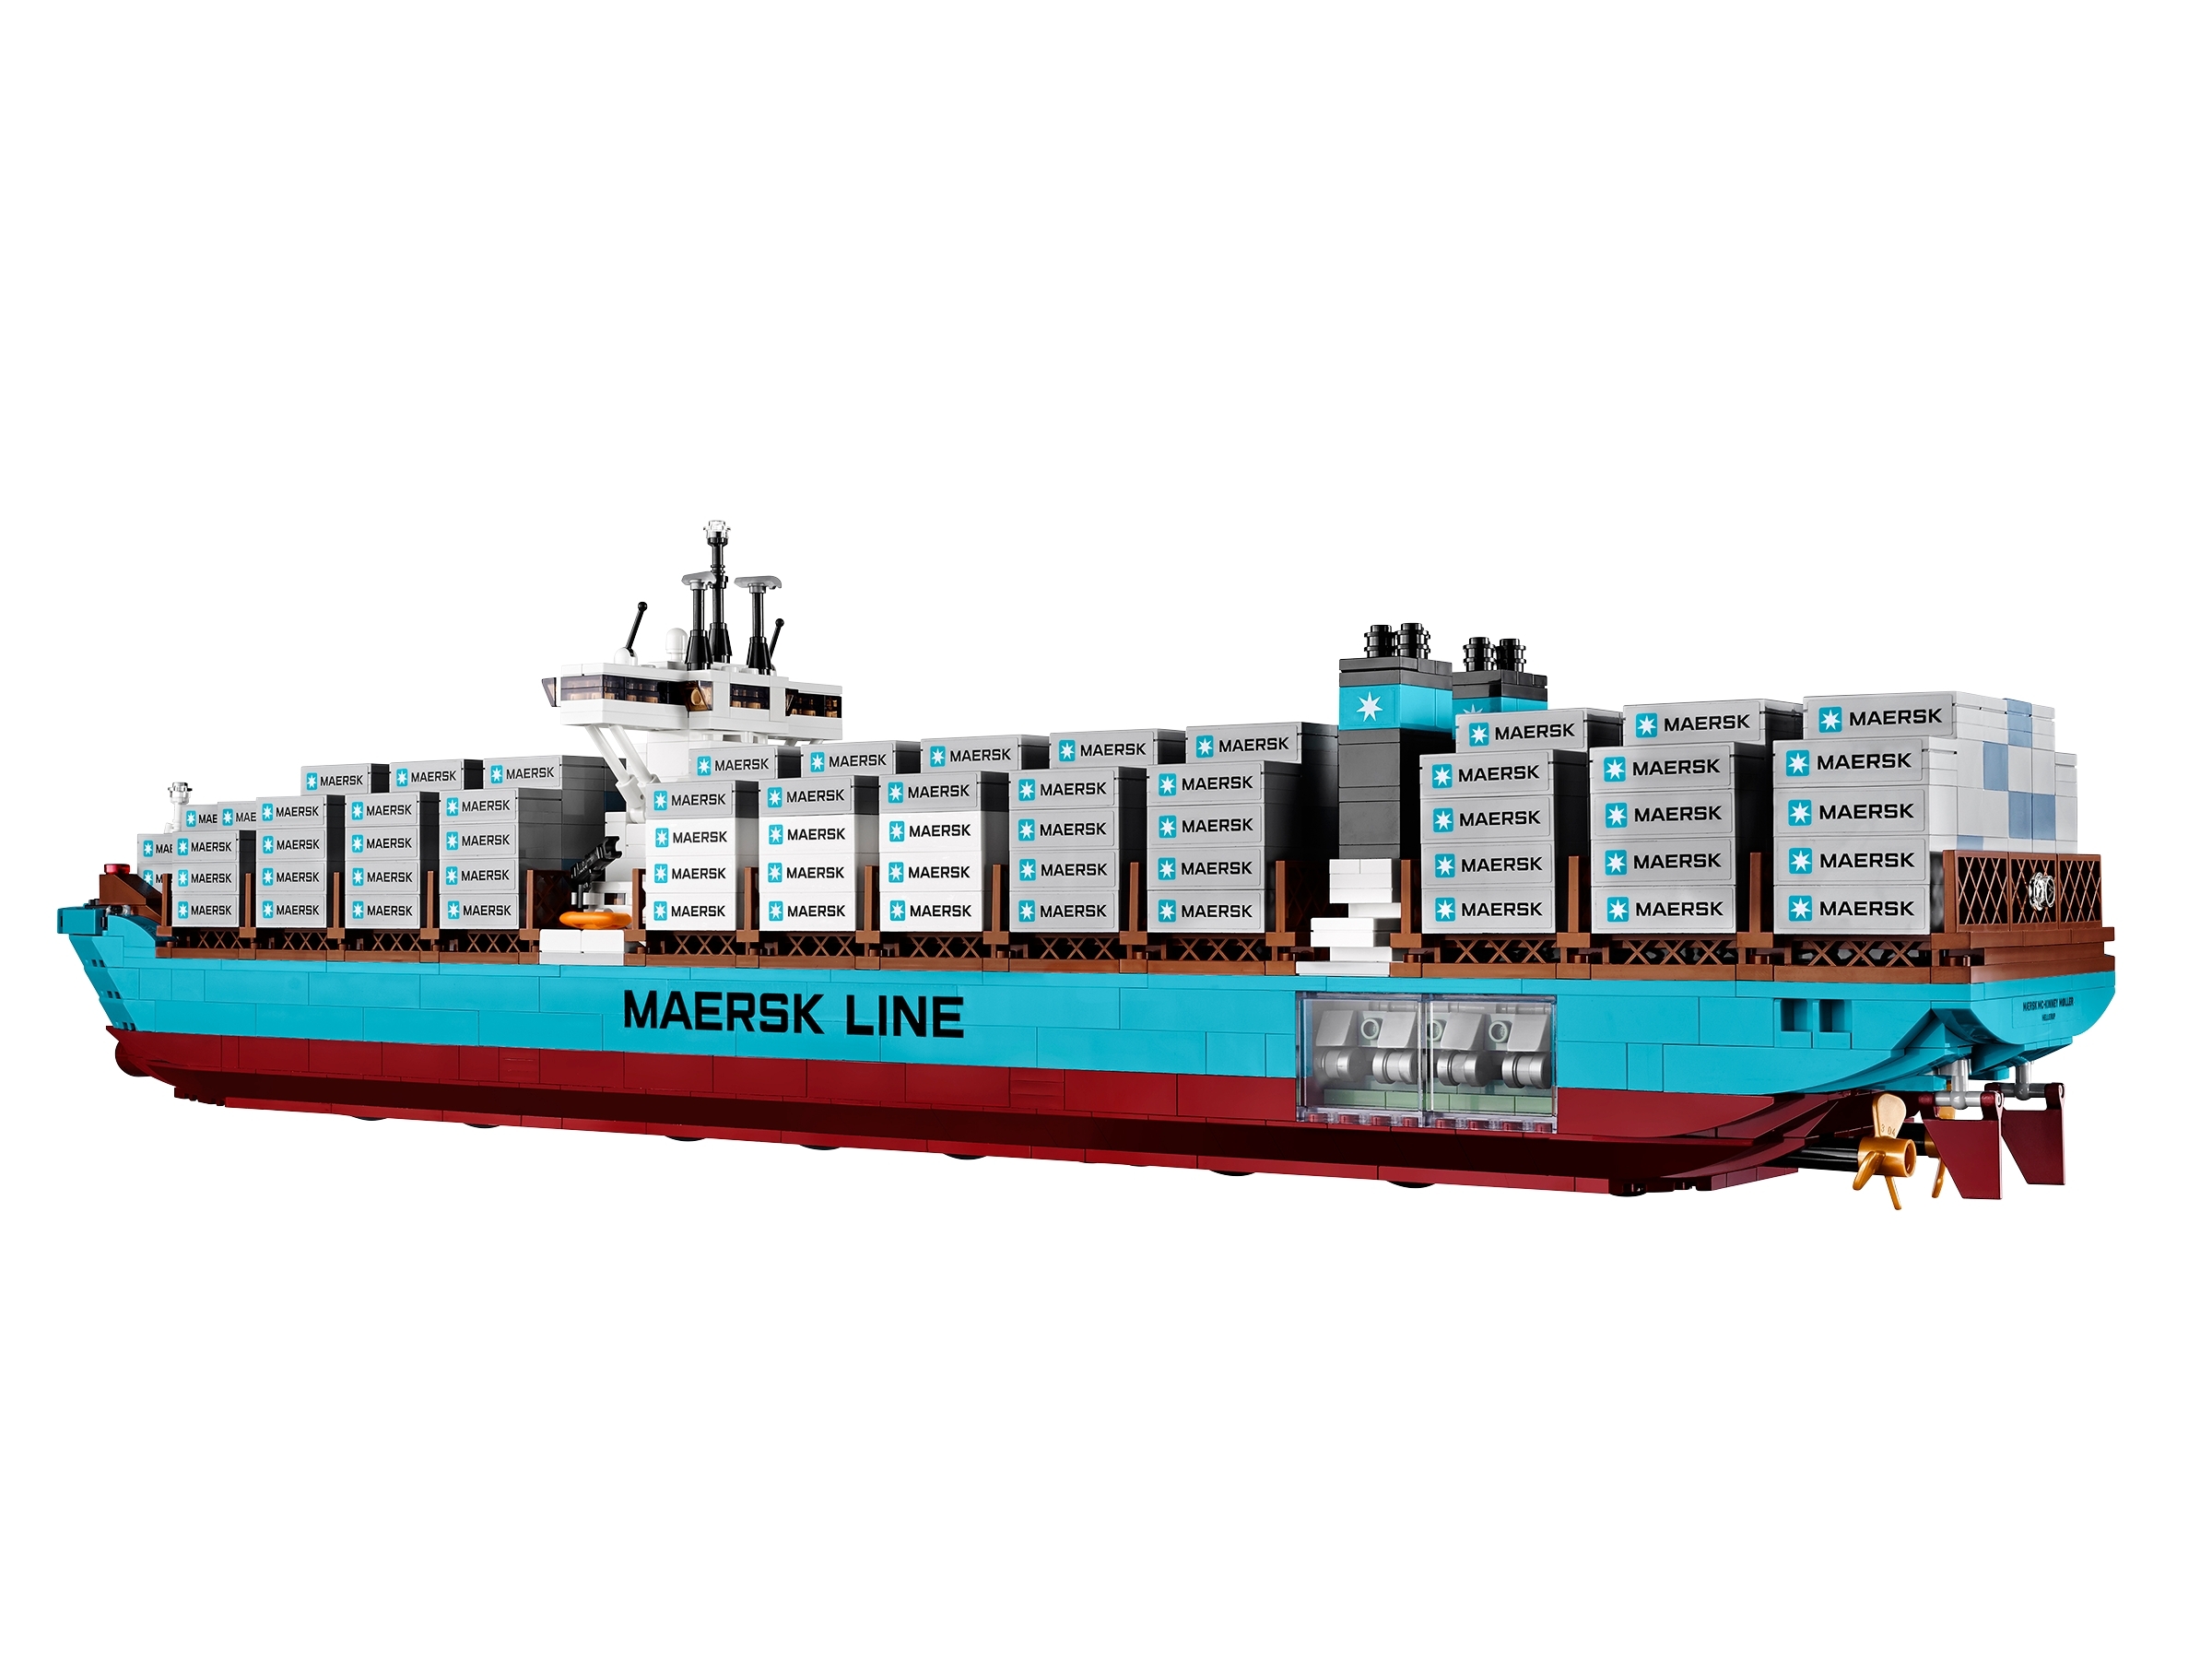 lego maersk container